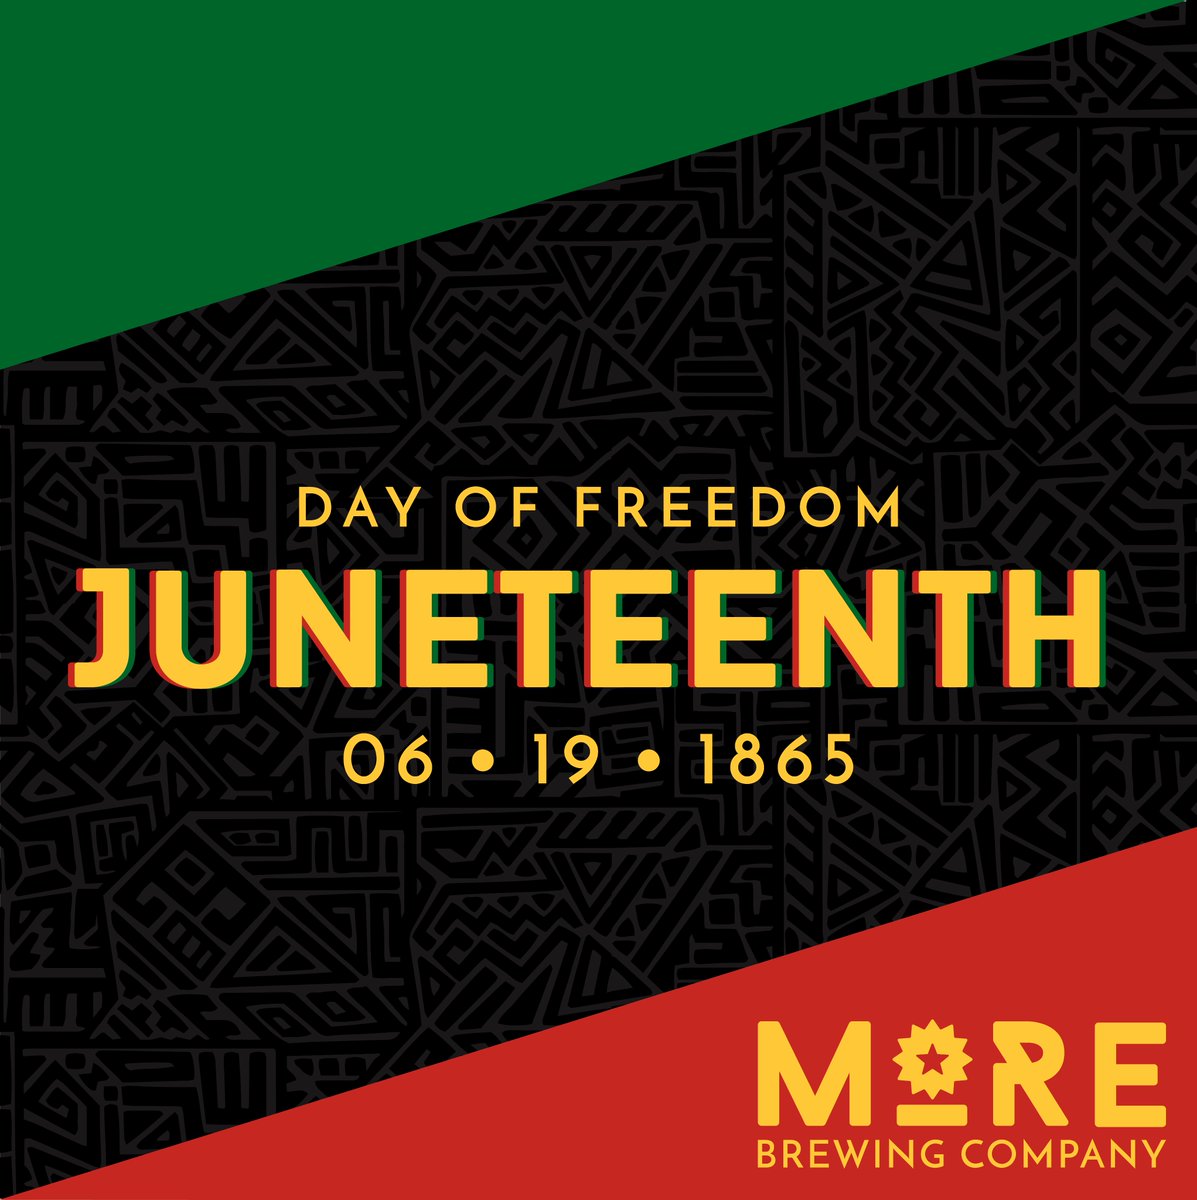 Today, we honor Juneteenth, a pivotal moment in American history. It signifies the end of slavery and the triumph of freedom. Let's commemorate the strength, resilience, and spirit of the African American community and the importance of inclusion and togetherness. 🍻